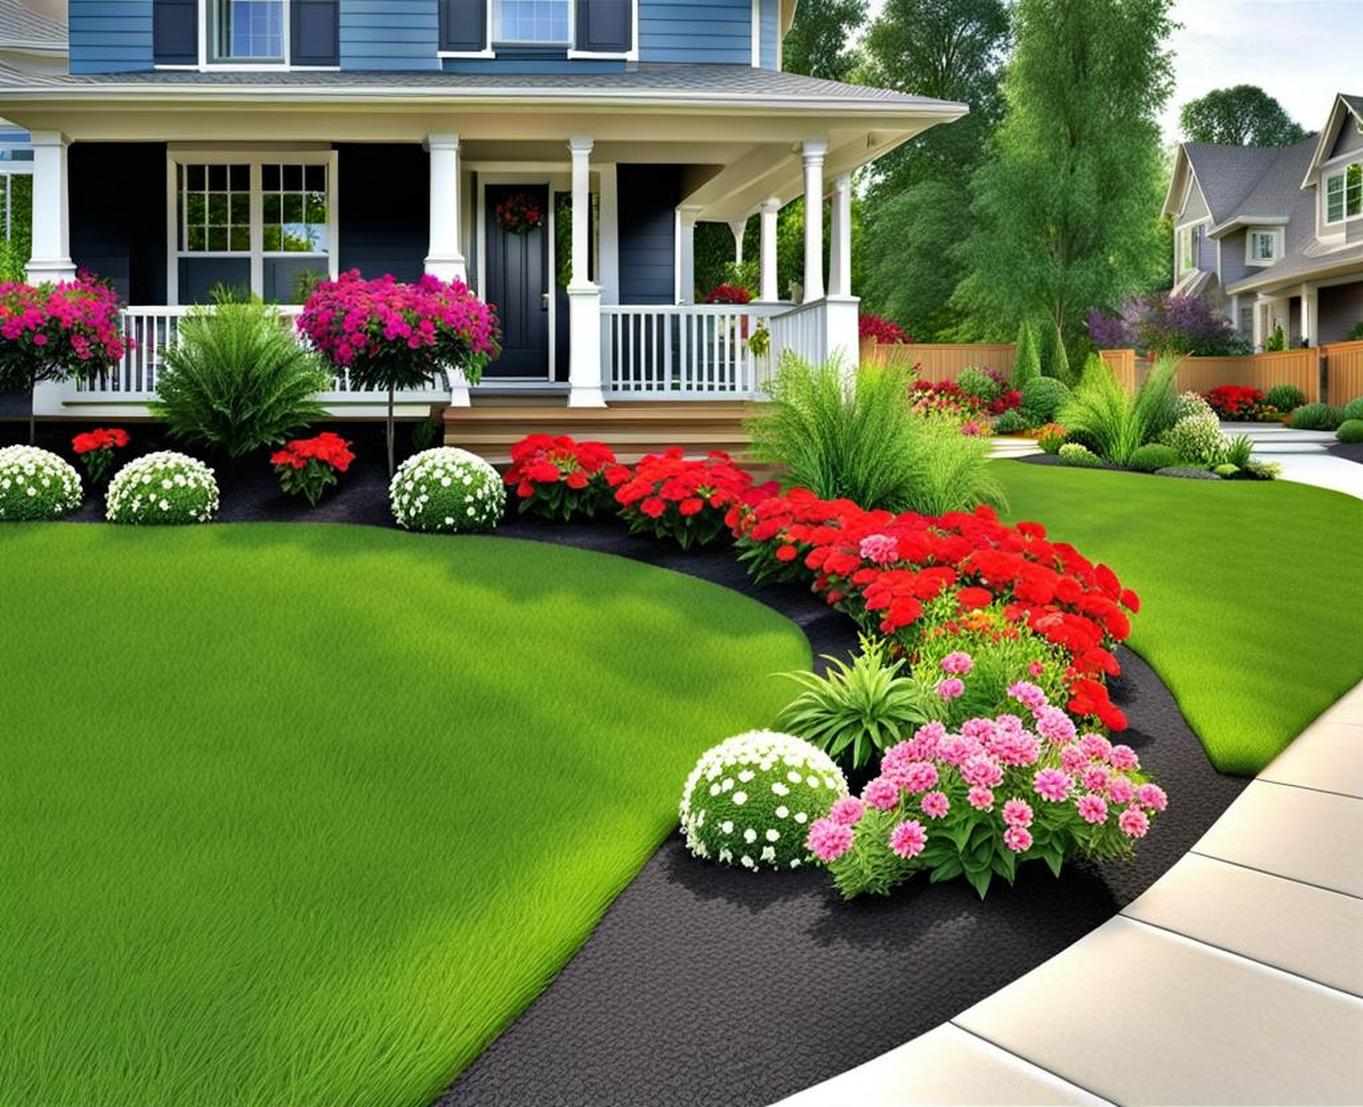 curb appeal front yard landscaping ideas on a budget